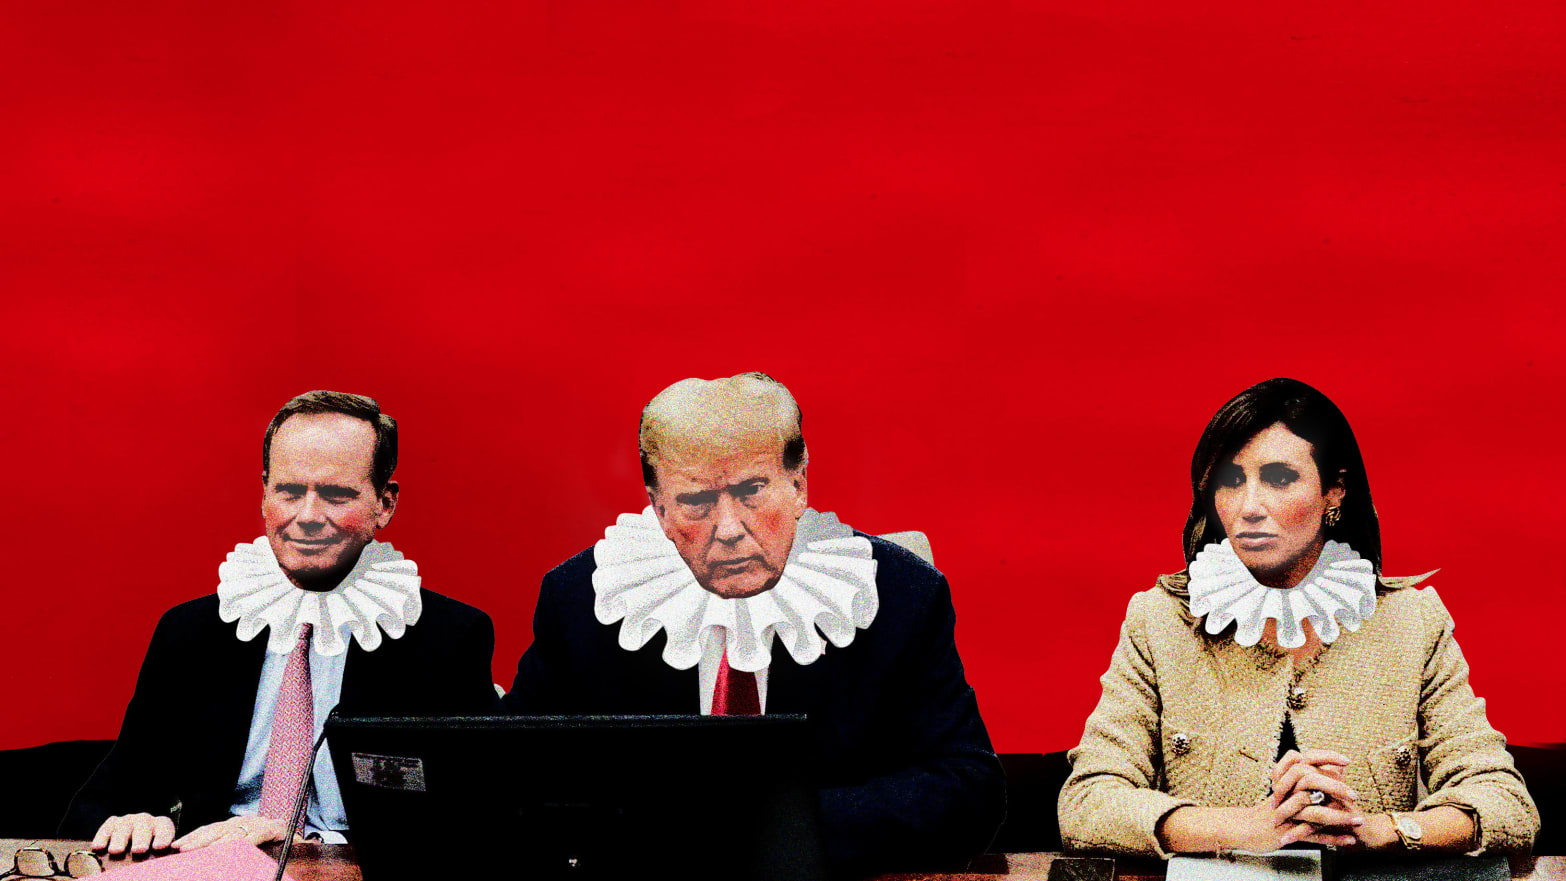 A photo illustration showing Donald Trump and his lawyers at his fraud trial dressed up as jesters.